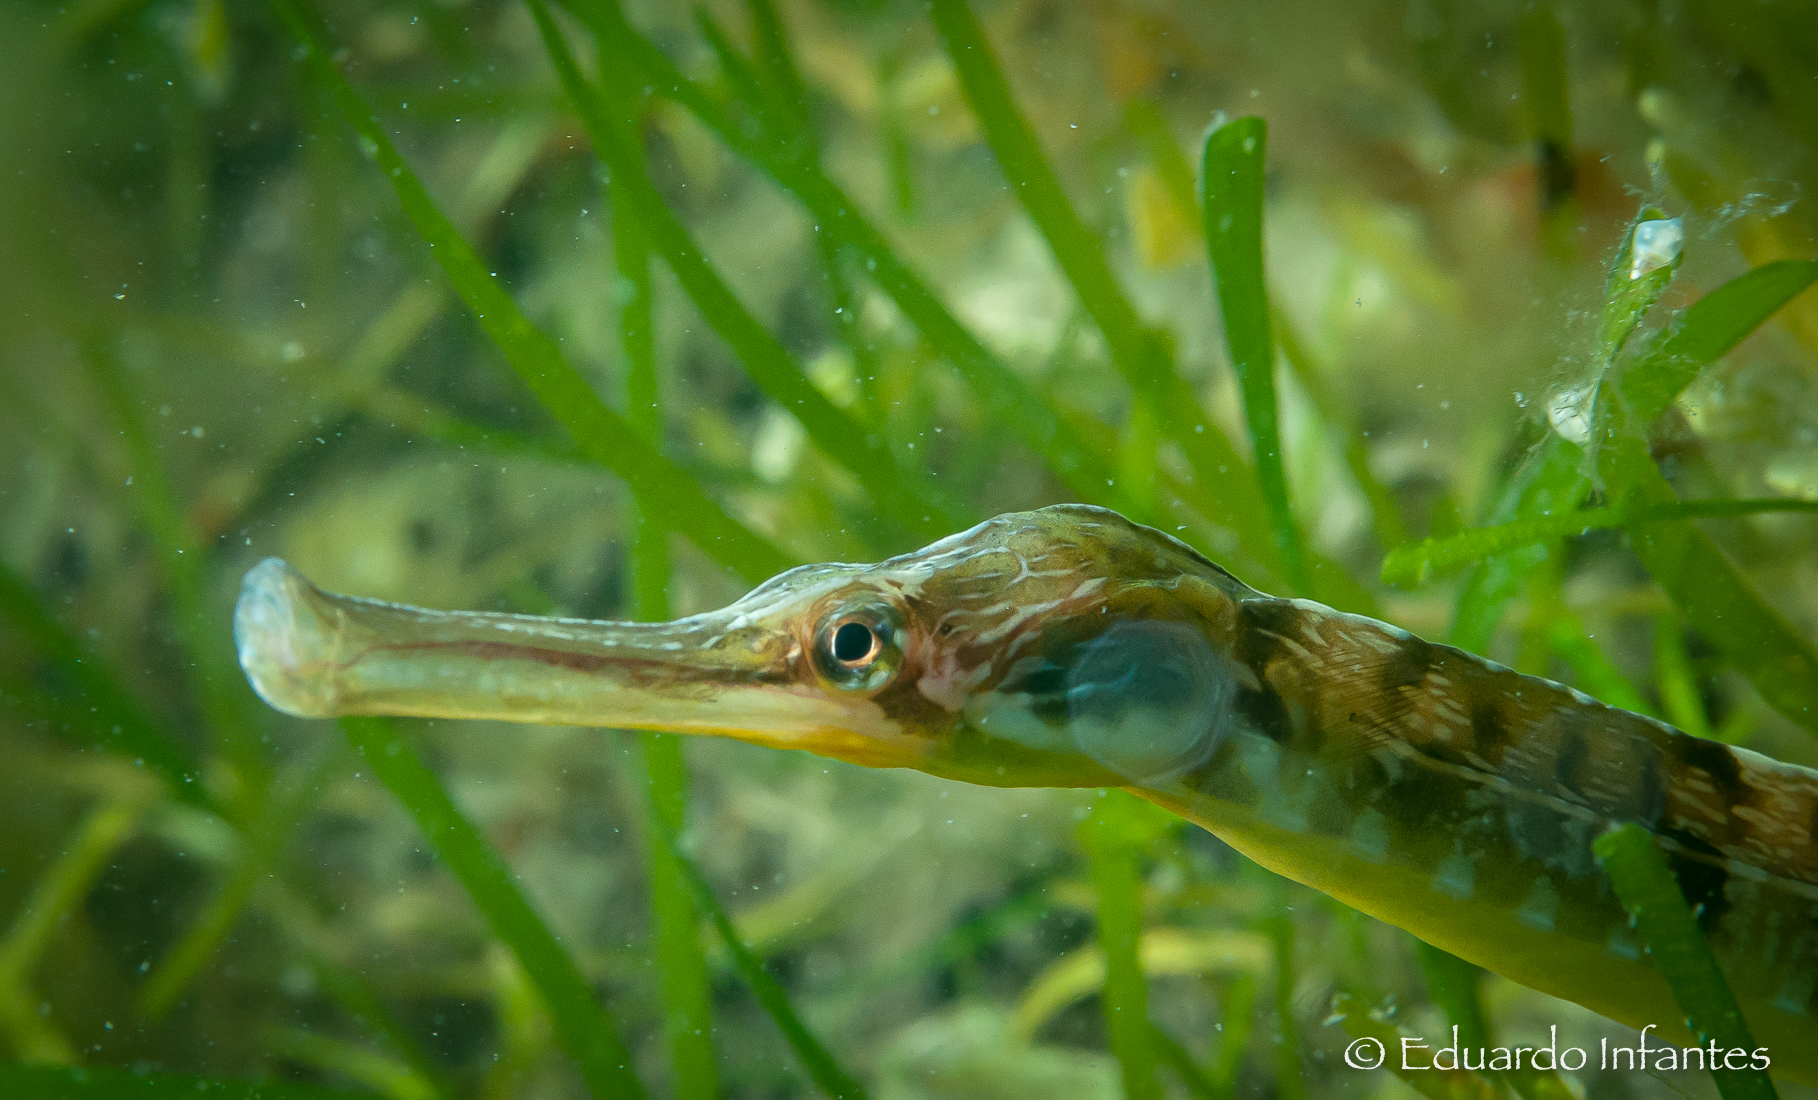 Healthy Seagrass Forms Underwater Meadows That Harbor Diverse Marine Life